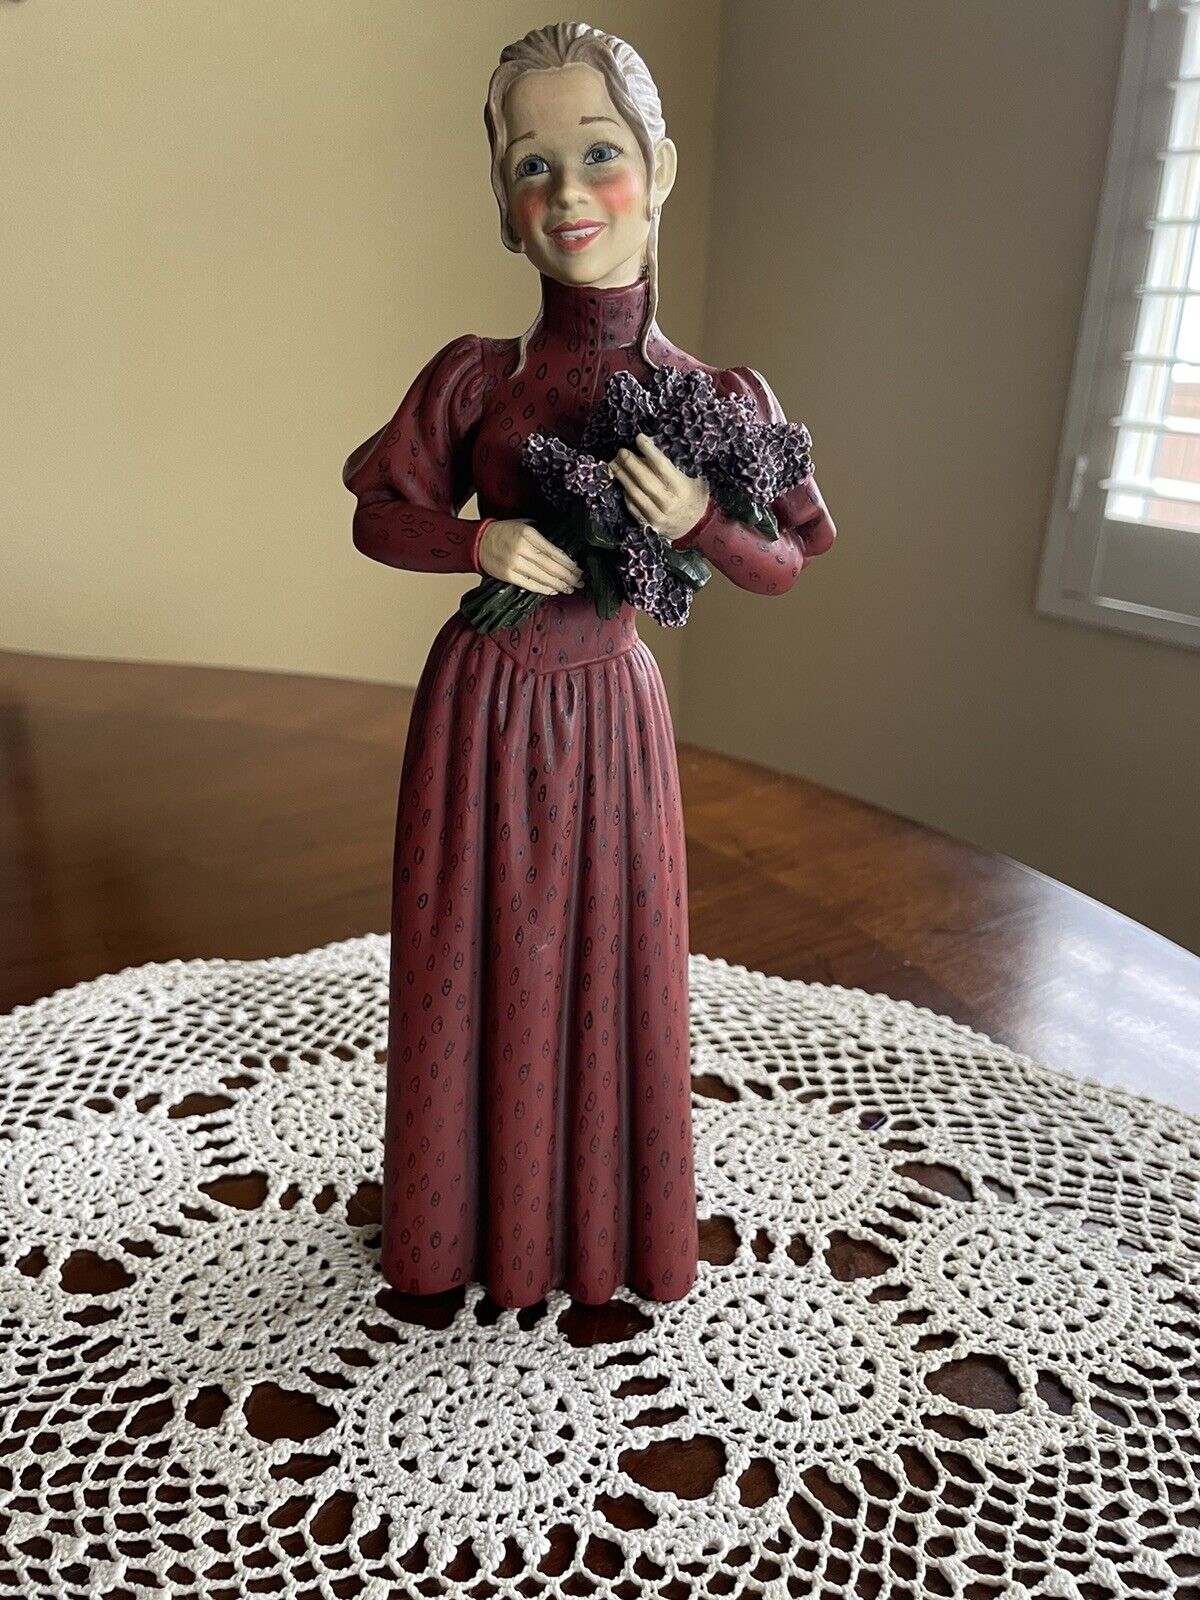 Stunning Candy Design Of Norway Collectible Woman Figurine Lilacs Vintage